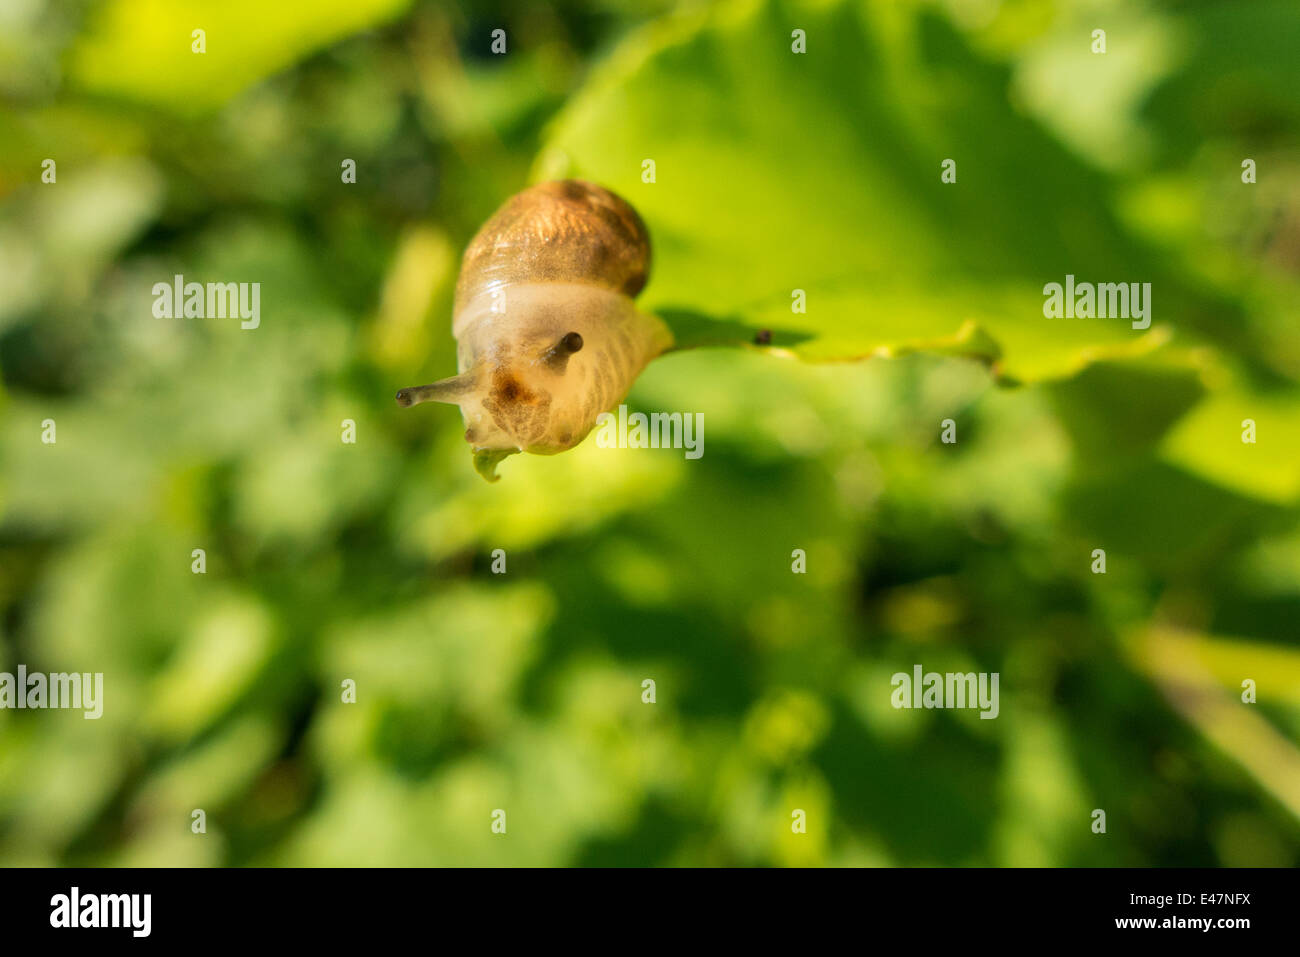 Small snail on leaf. Stock Photo